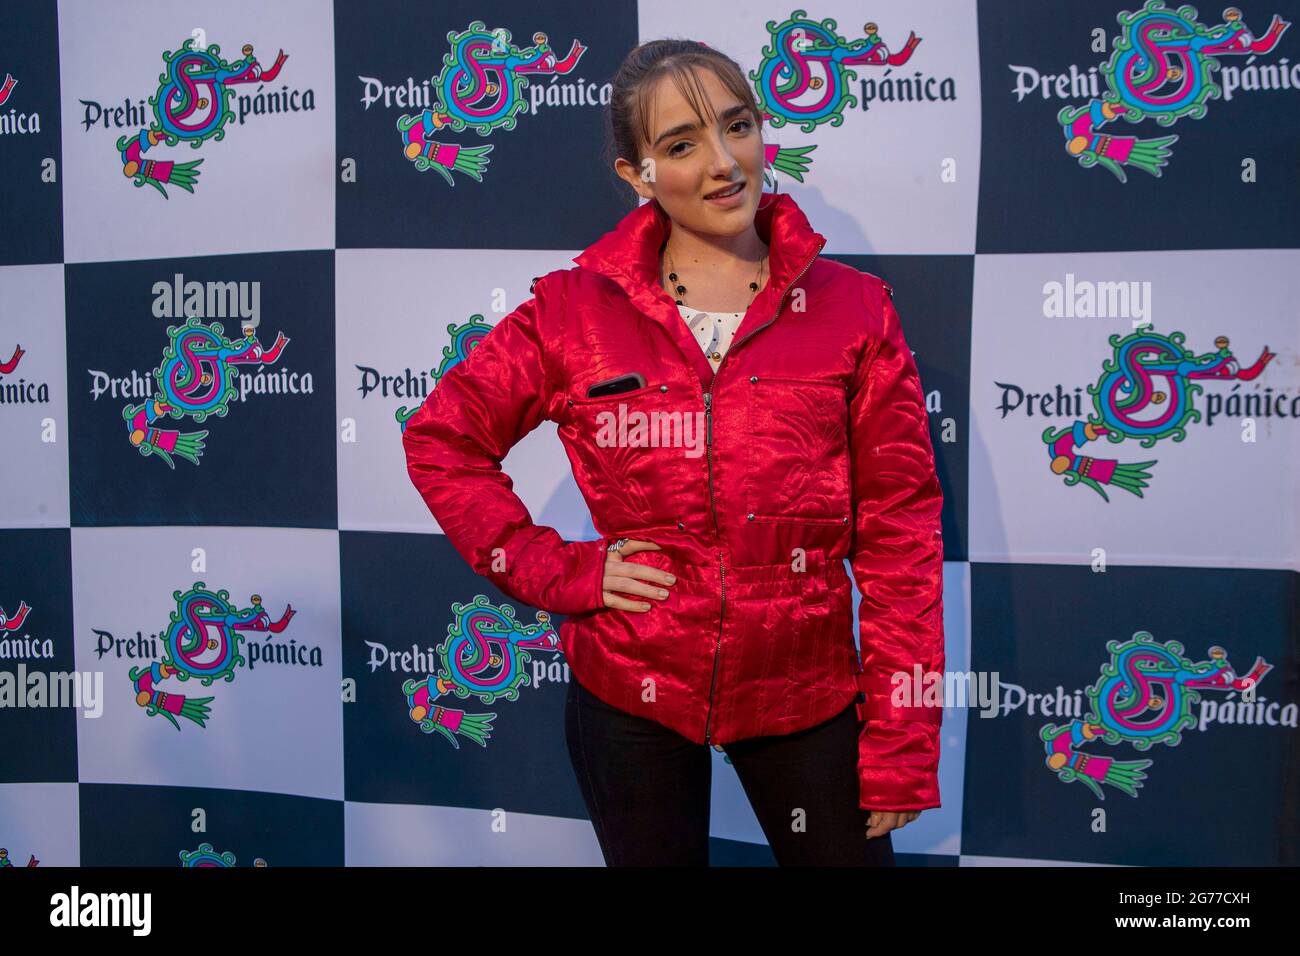 MEXICO CITY, MEXICO - JULY 10: Actress Elaine Haro poses for photos during the red carpet of the   Xochimilco Pre-Hispanic show to promote start 2021 season at Xochimilco Ecological Park on July 10, 2021 in Mexico City, Mexico. (Photo by Eyepix/Sipa USA) Stock Photo